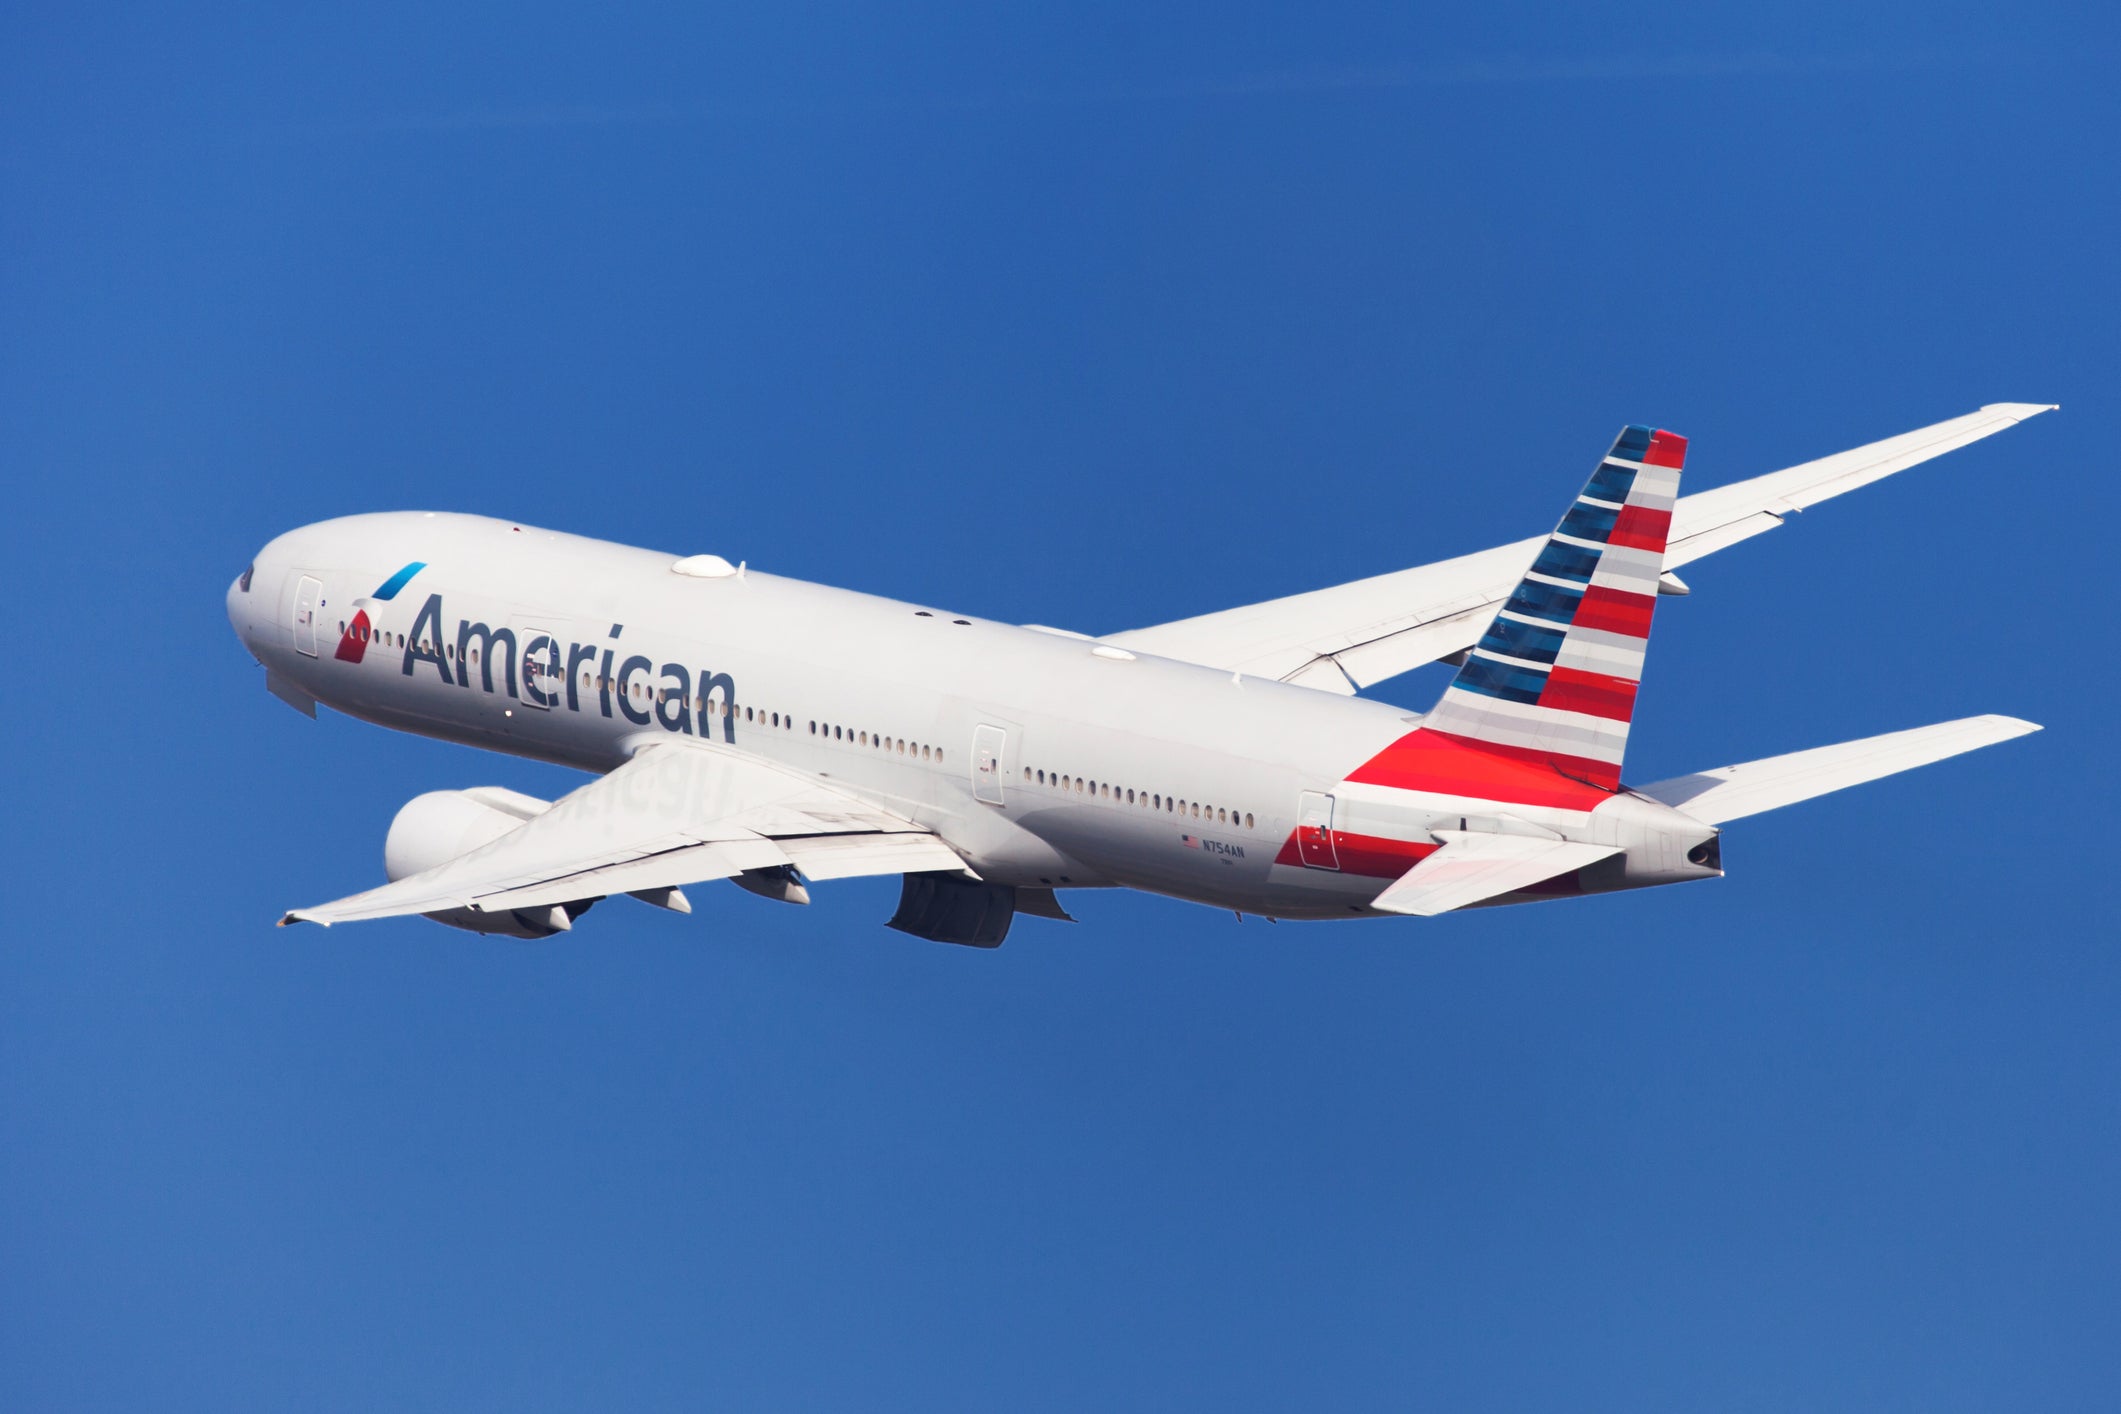 An American Airlines employee has been charged with sabotage